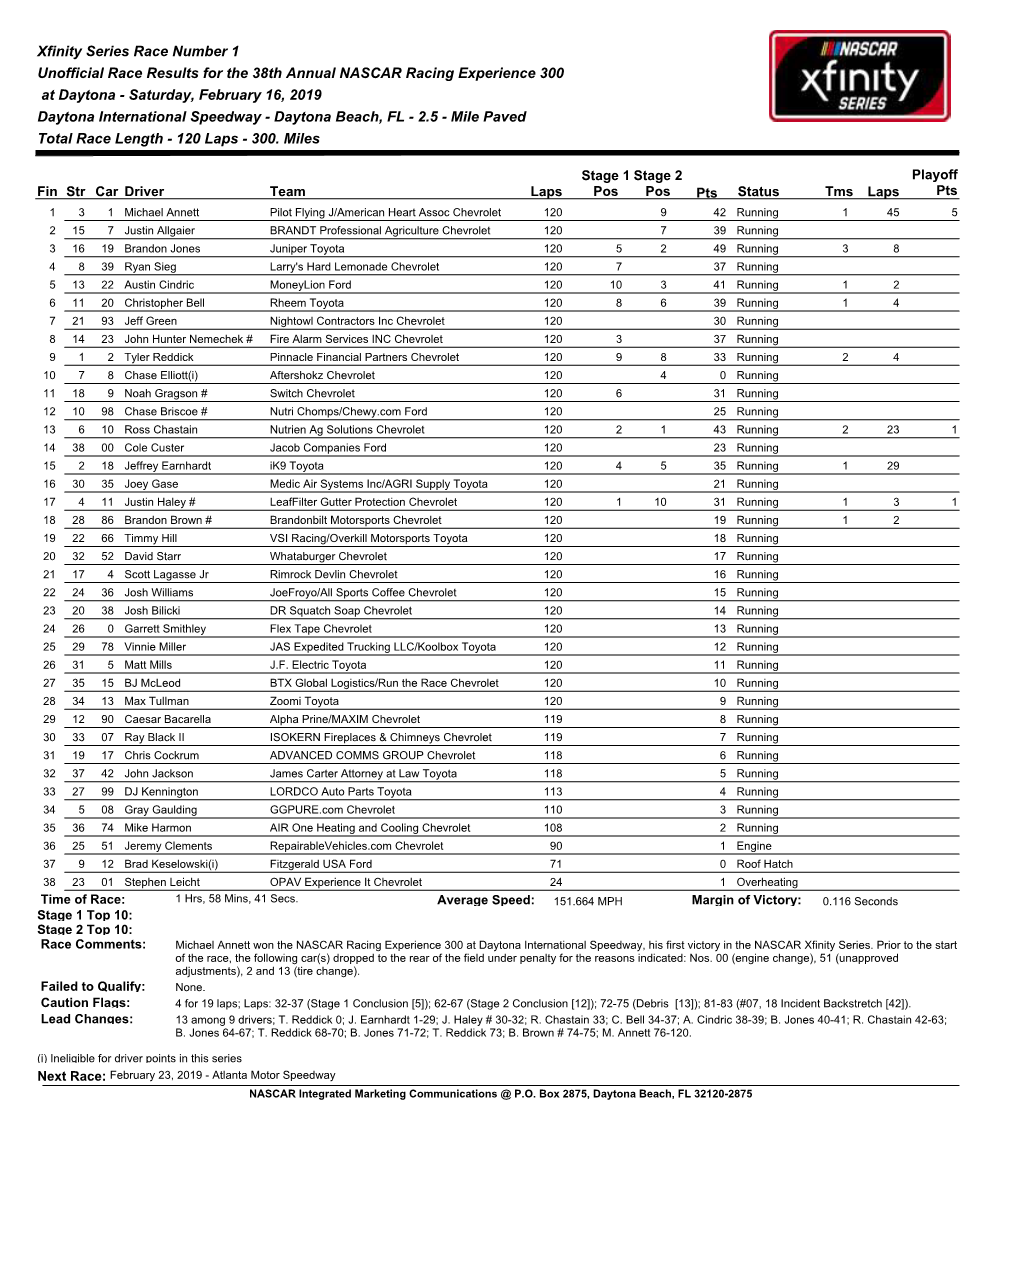 Xfinity Series Race Number 1 Unofficial Race Results for the 38Th Annual NASCAR Racing Experience 300 at Daytona